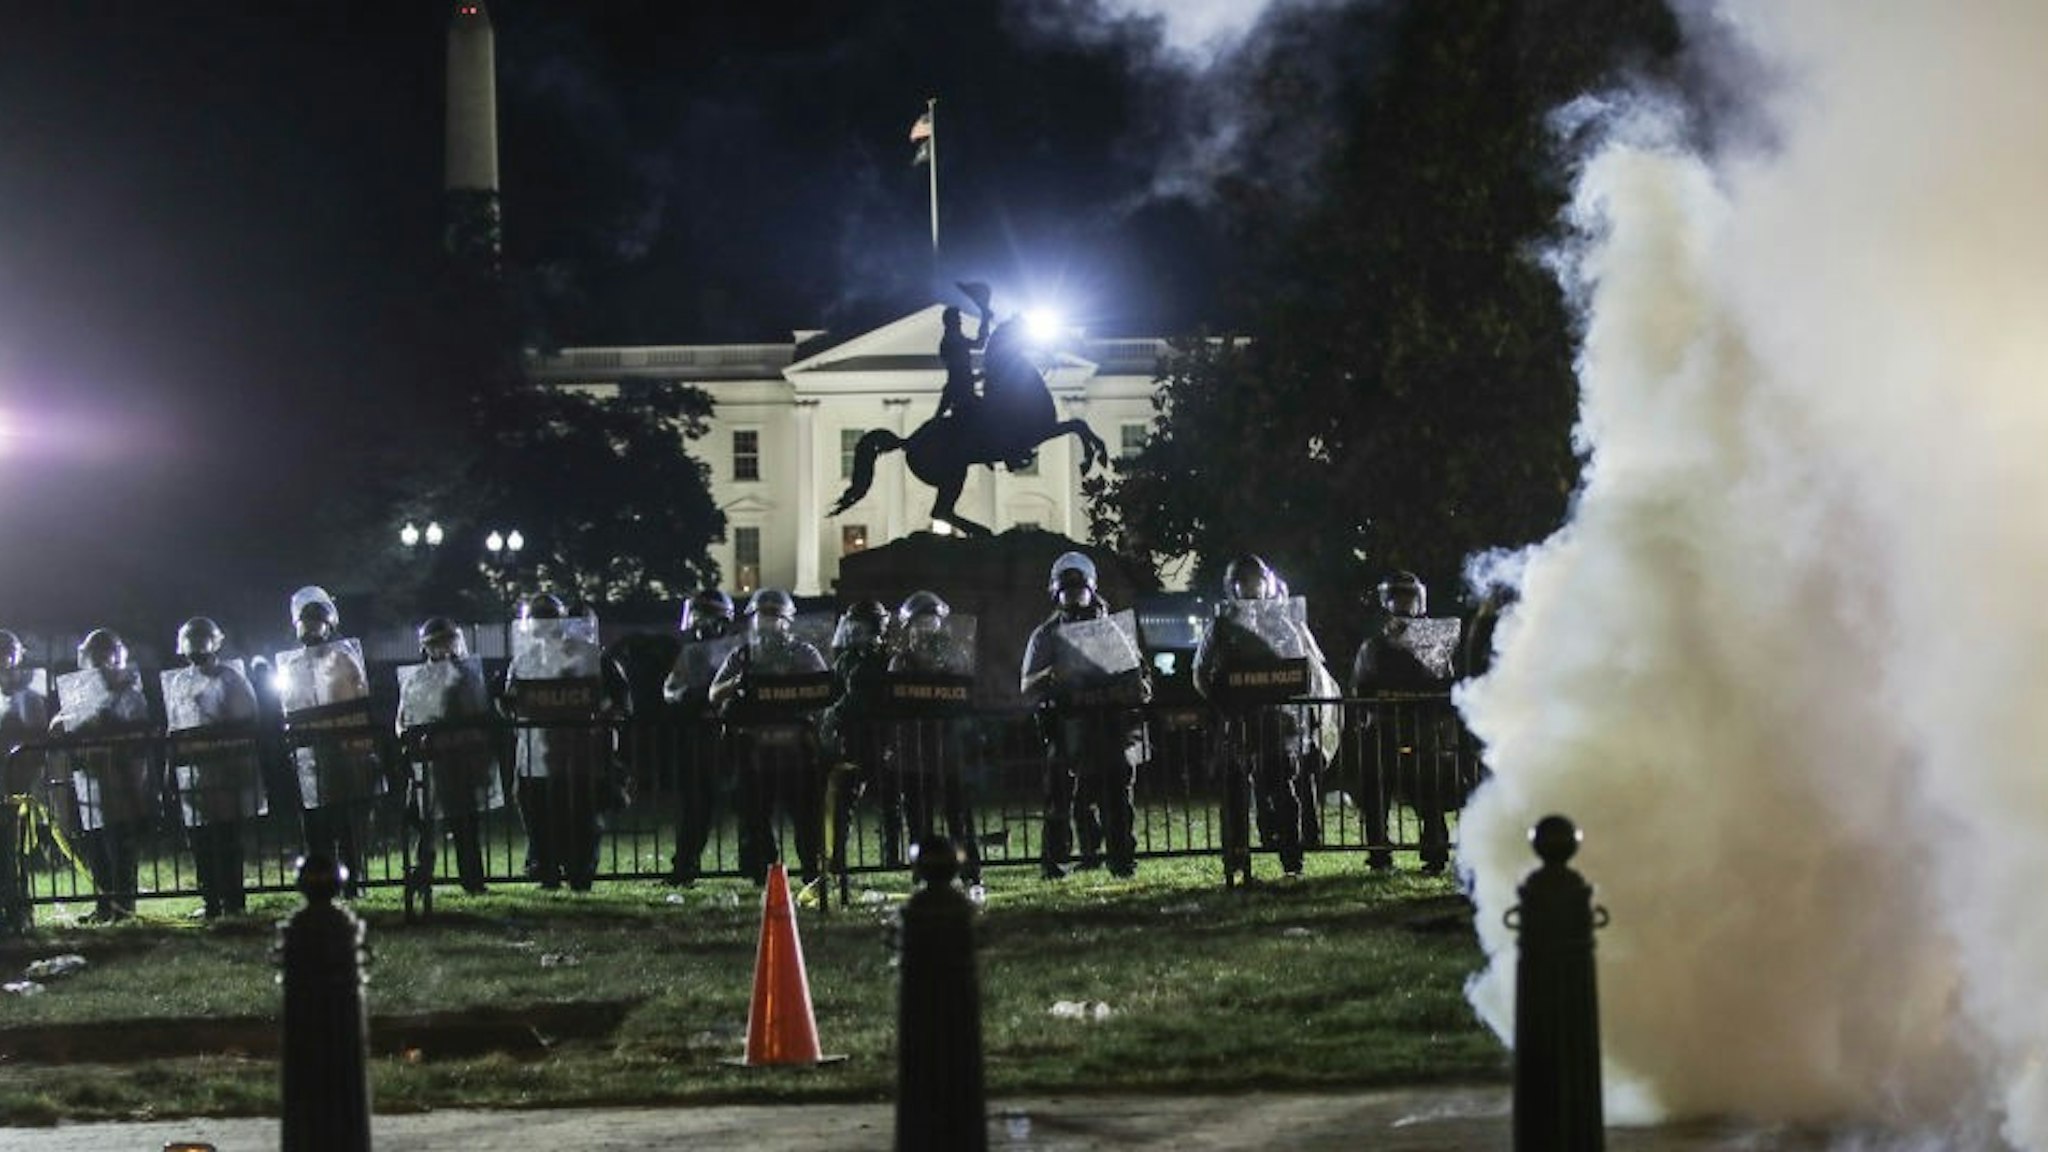 WASHINGTON, USA - JUNE 1: Police intervene in protesters with tear gas near White House during a protest over the death of George Floyd, an unarmed black man who died after being pinned down by a white police officer in Washington, United States on June 1, 2020. (Photo by